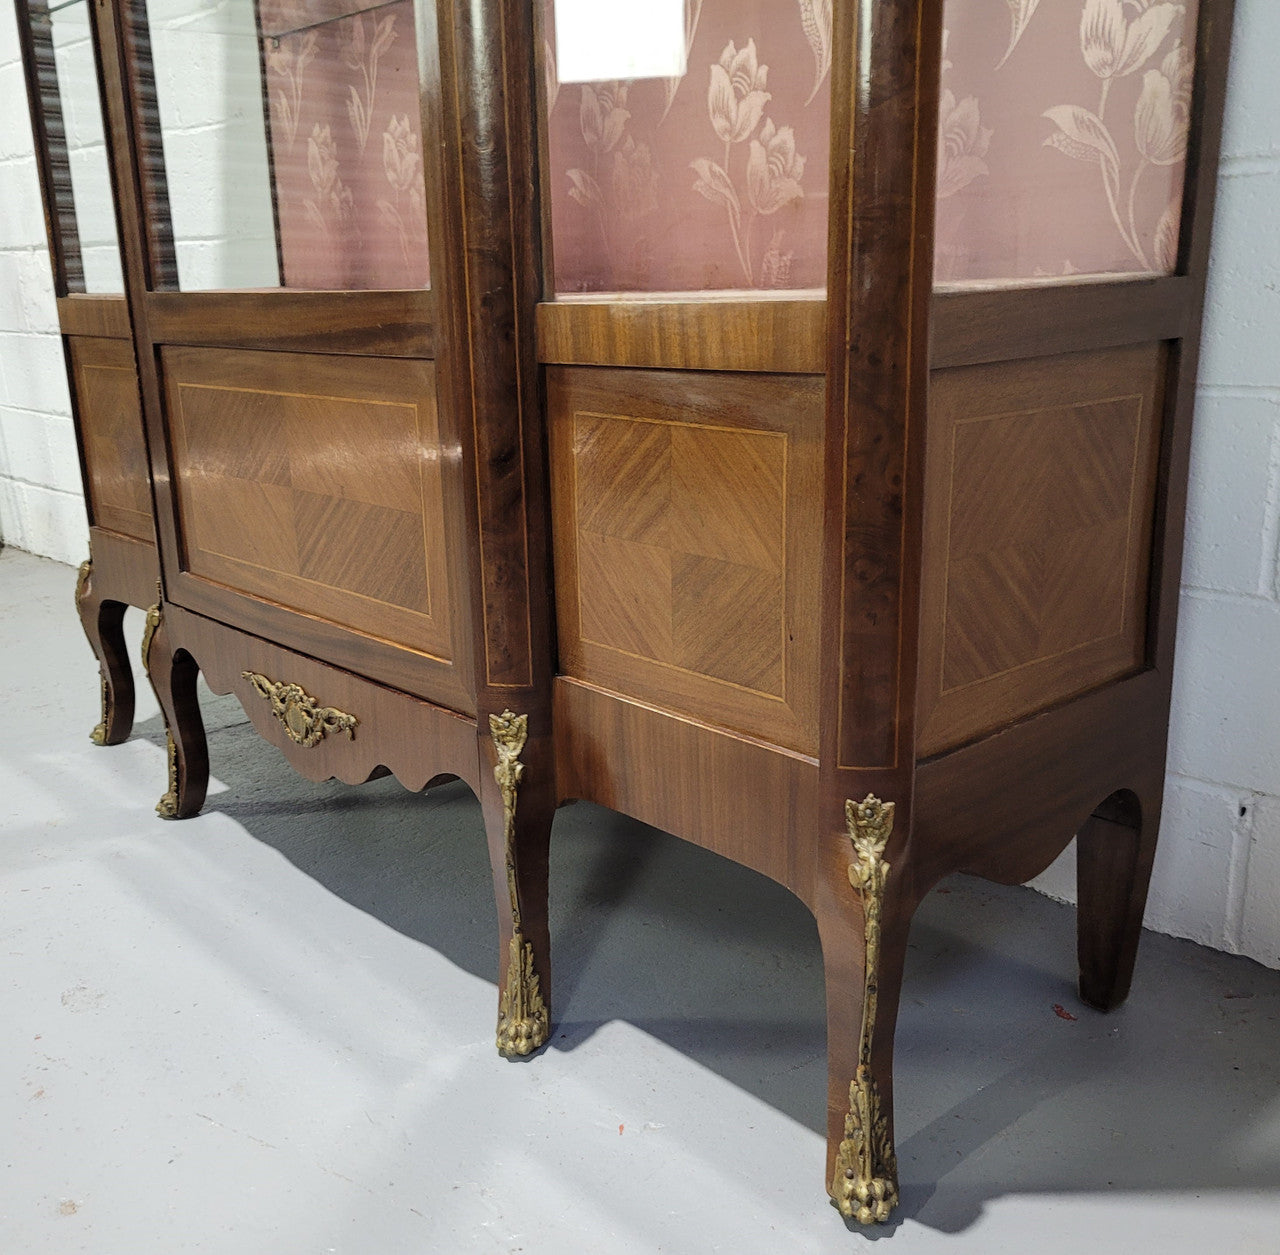 Beautiful French Louis XV style large walnut display cabinet with lovely ormolu mounts . There are two glass shelves and has its original dusky pink fabric in good condition.